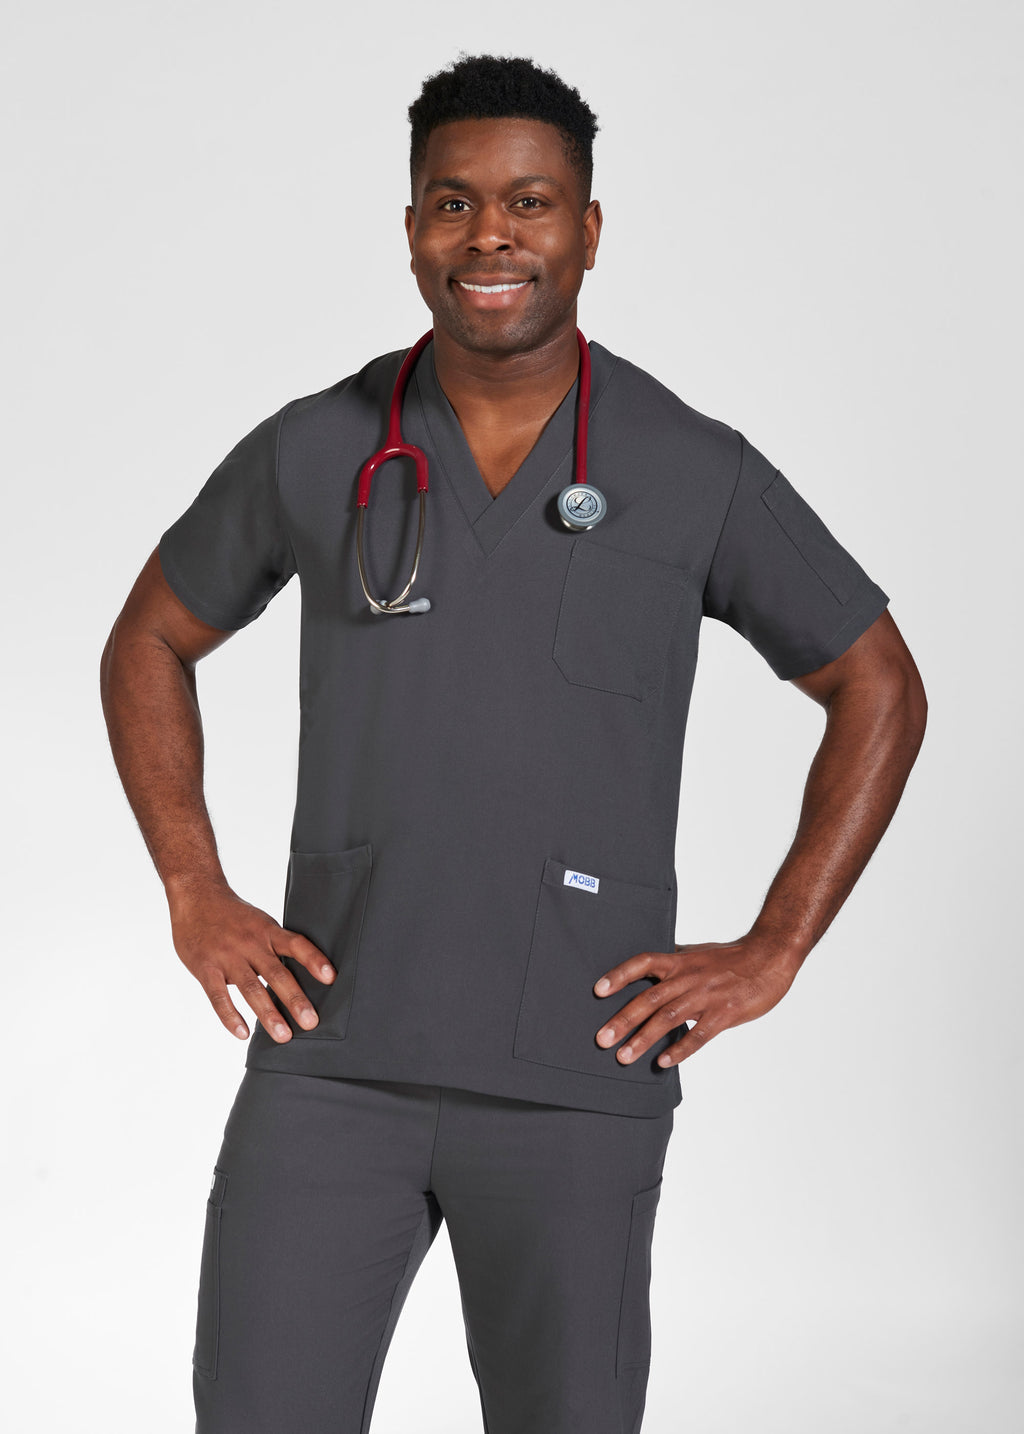 Product - The Andy Unisex MOBB Scrub Top